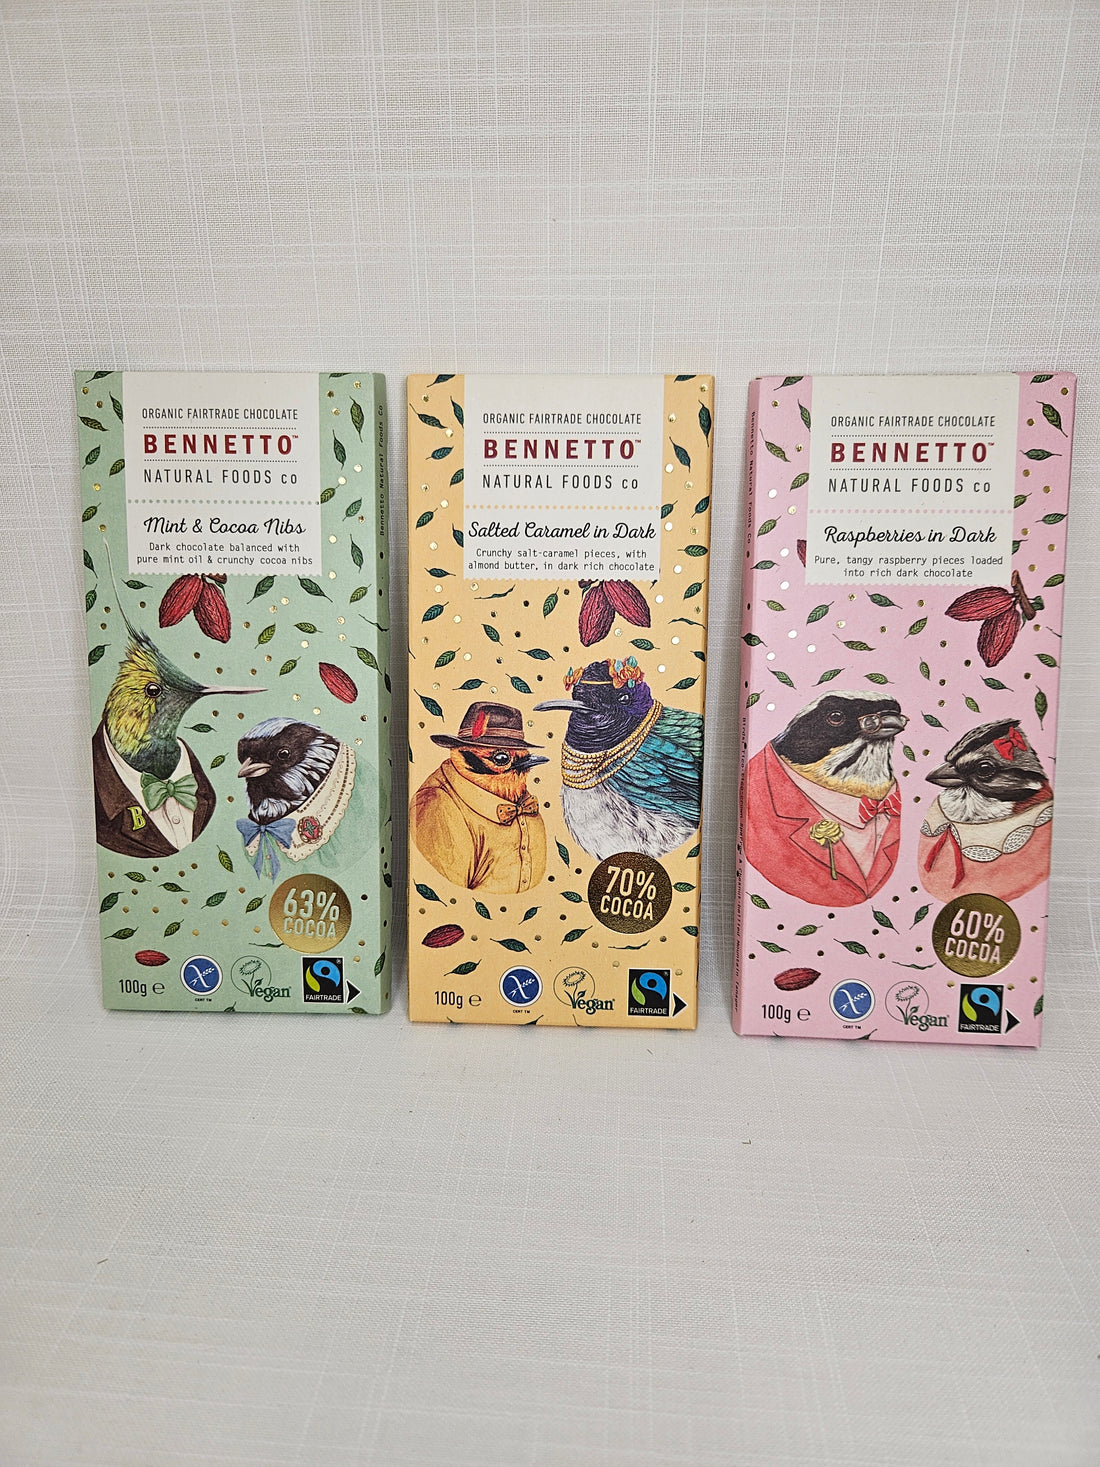 3x dark chocolate bars by Bennetto Natural Foods Co. Raspberry in Dark Chocolate, Salted Caramel in Dark Chocolate, Mint &amp; Cacao Nib Dark Chocolate.